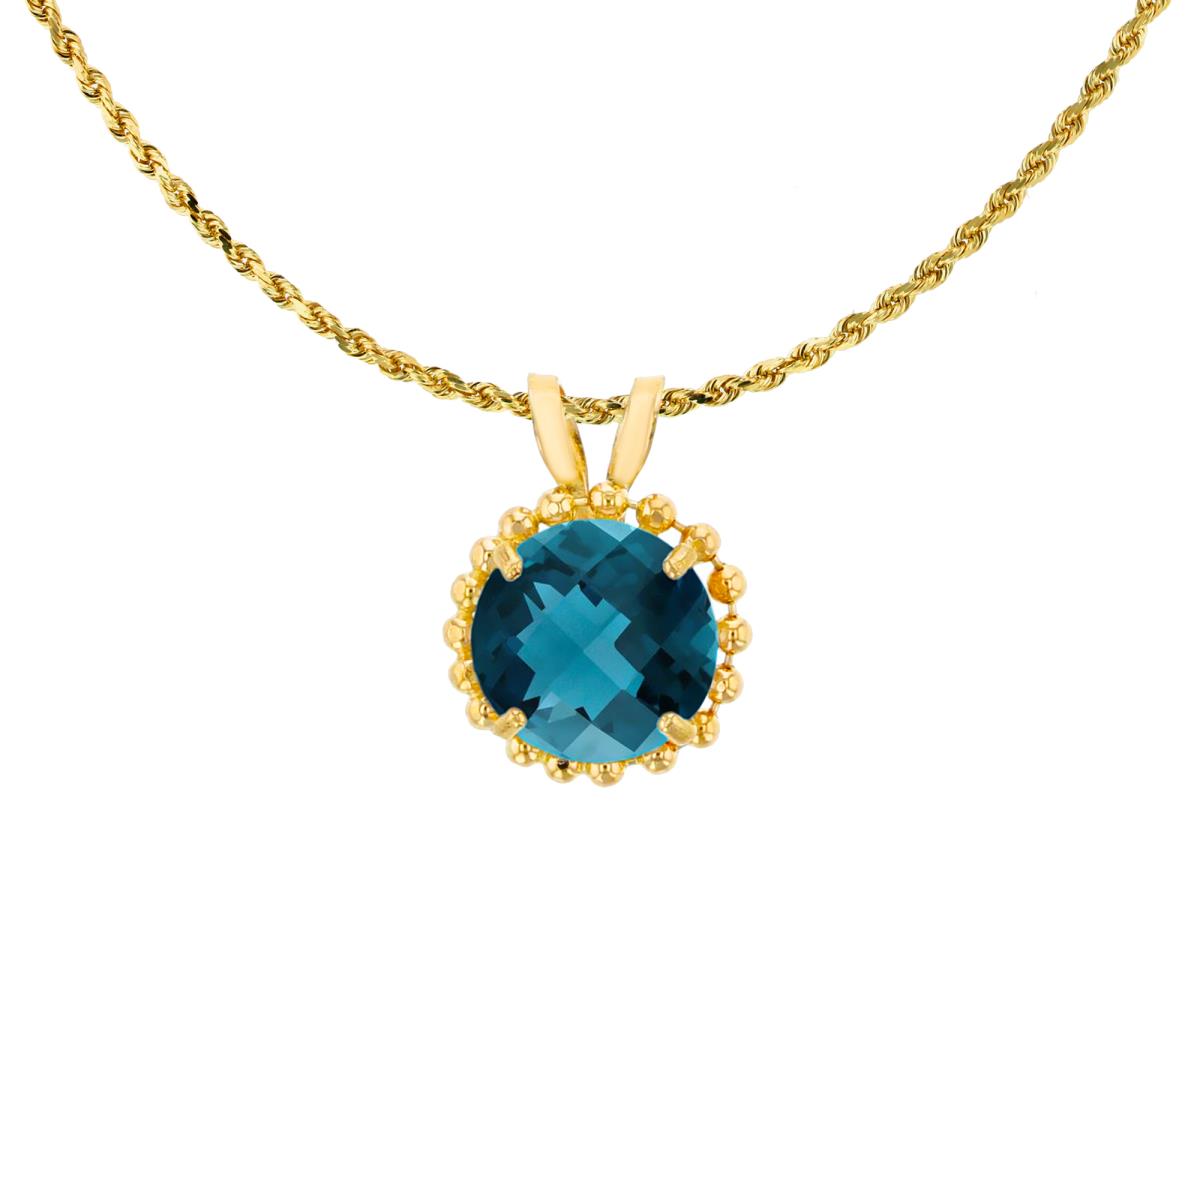 14K Yellow Gold 6mm Rd Cut London Blue Topaz with Bead Frame Rabbit Ear 18" Necklace